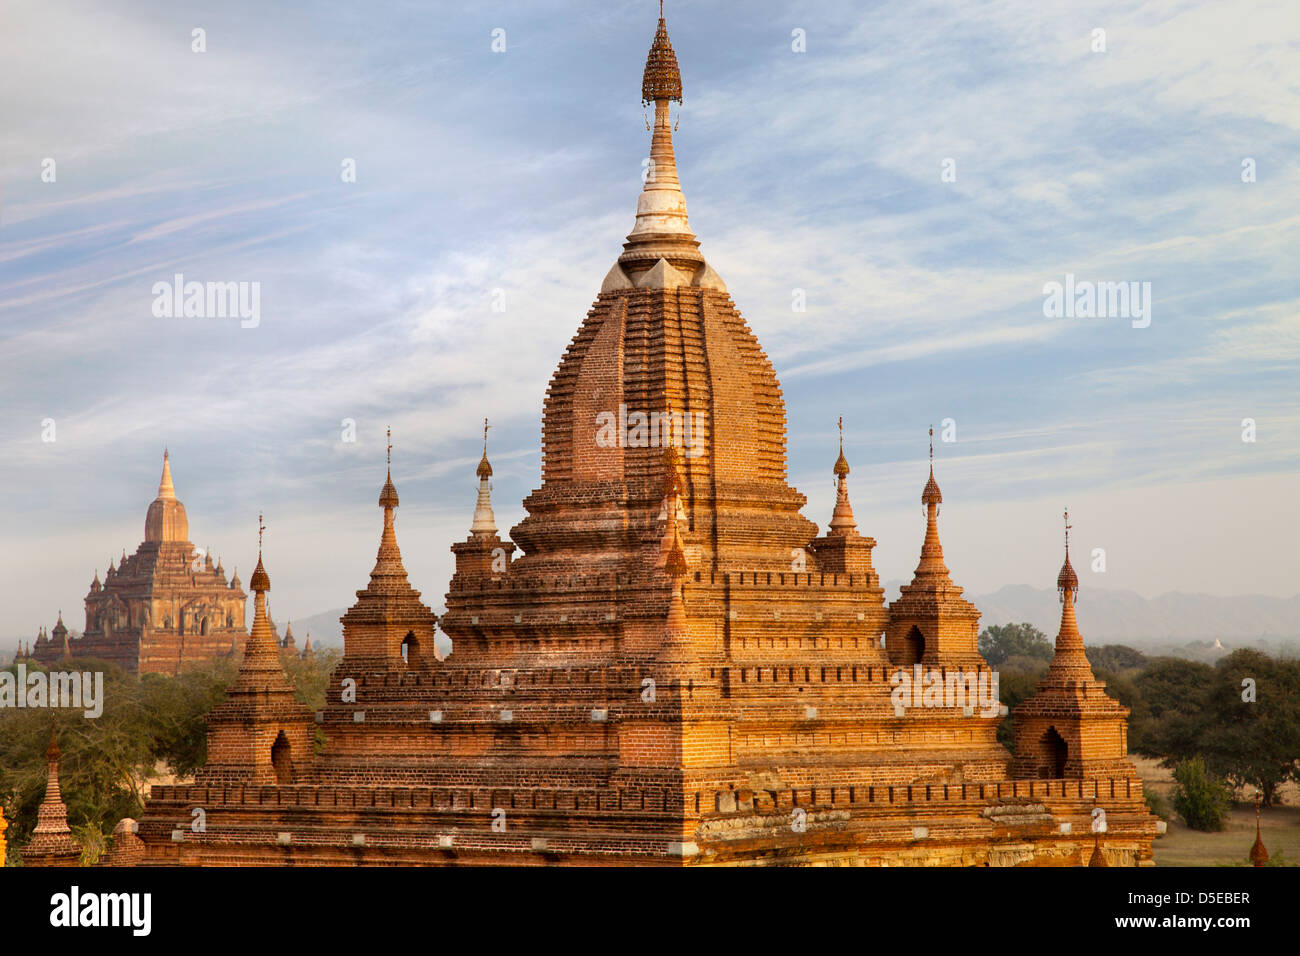 The Temples and Pagodas of Bagan, Myanmar - early morning 4 Stock Photo